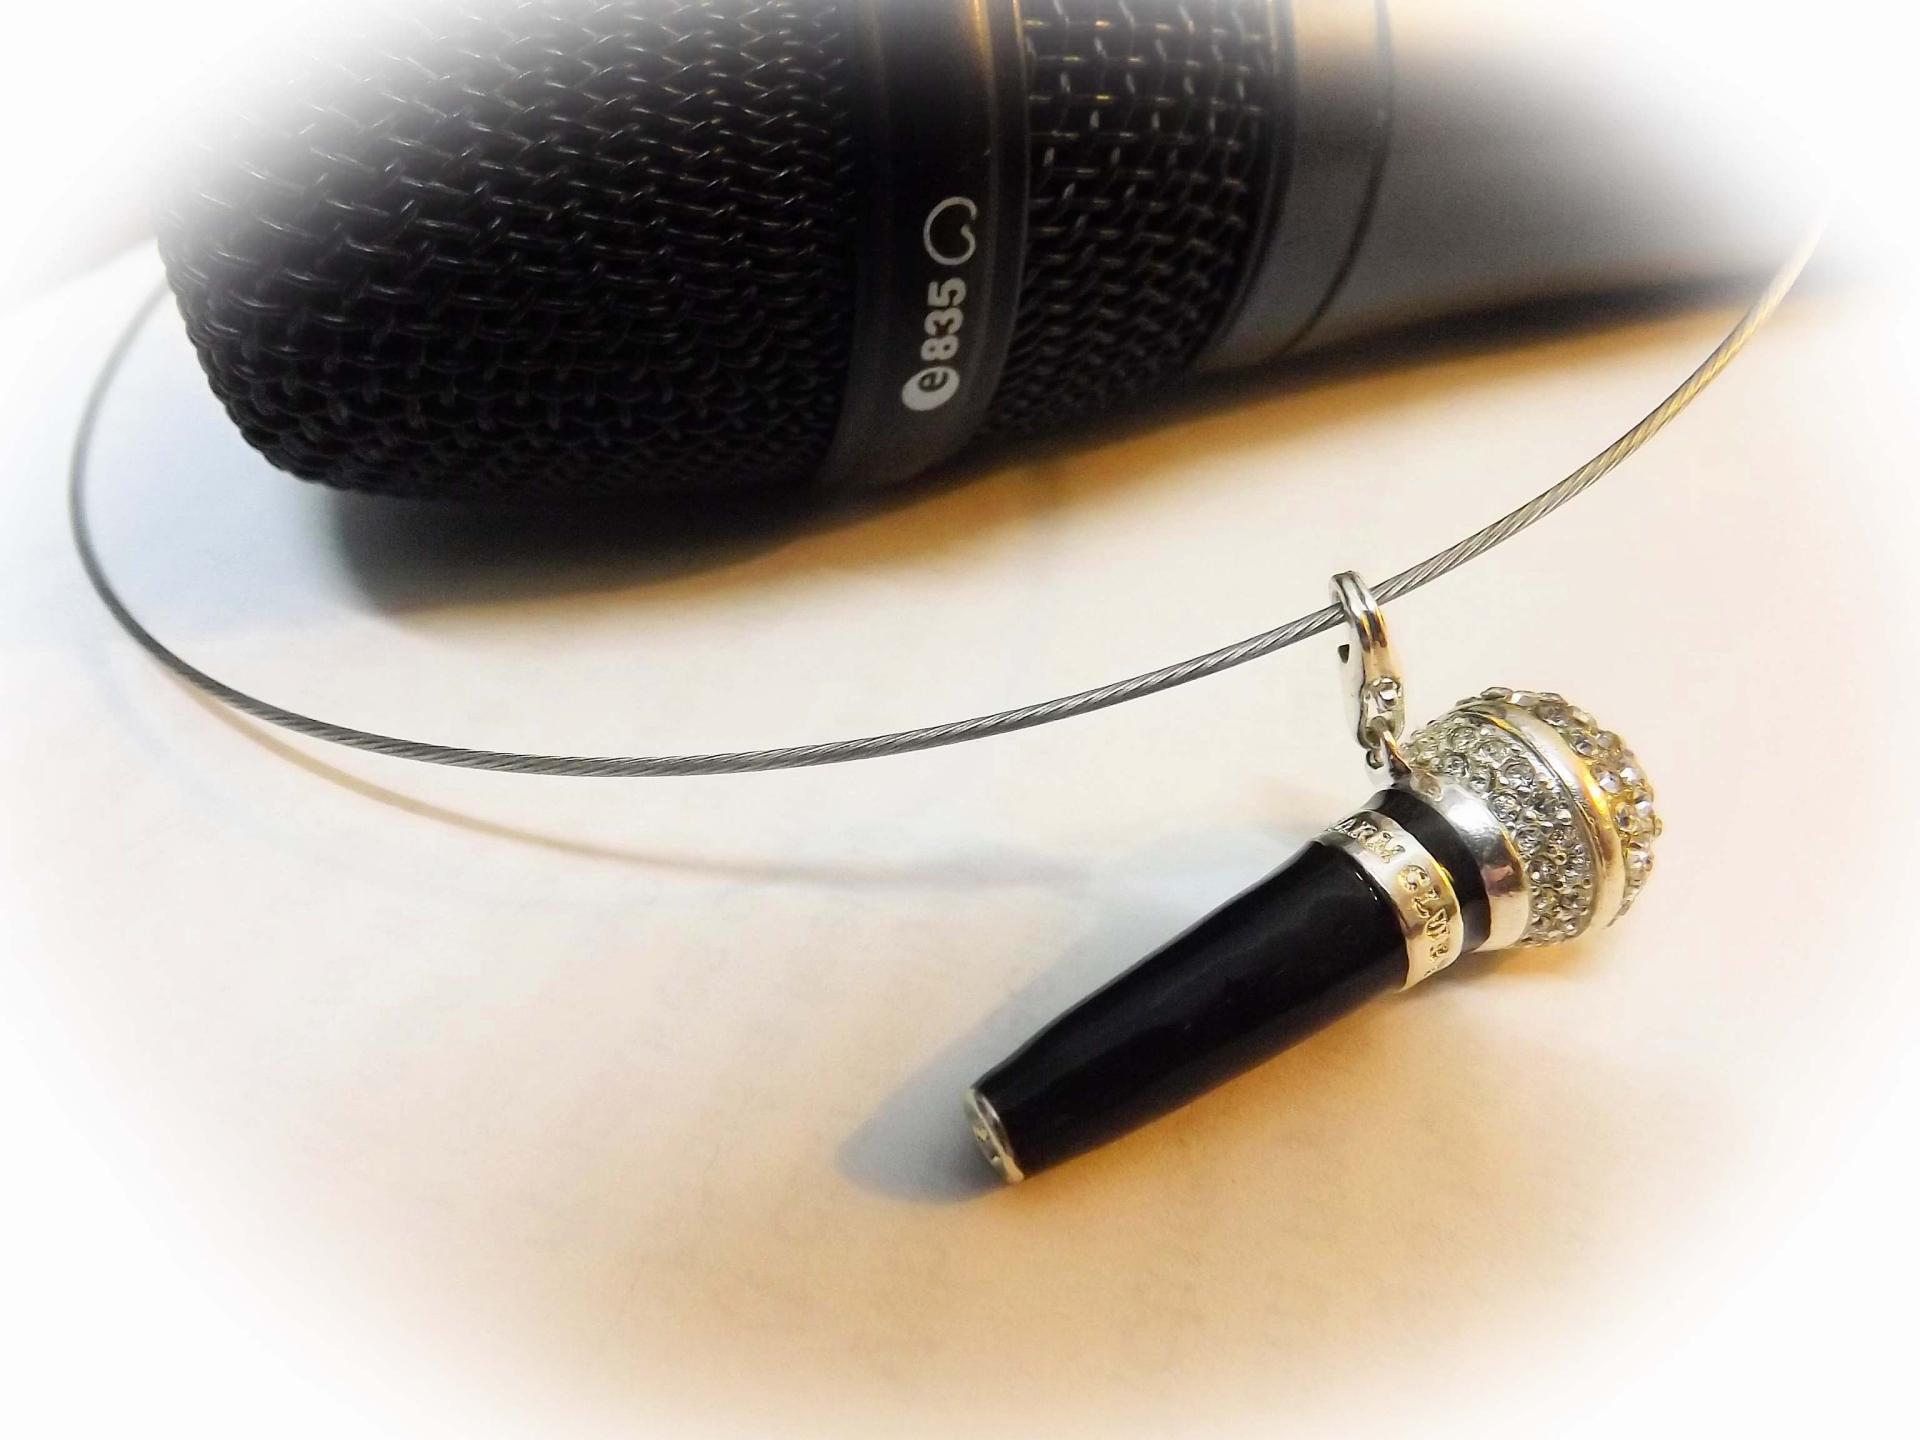 Microphone Pendant on Cable Cord